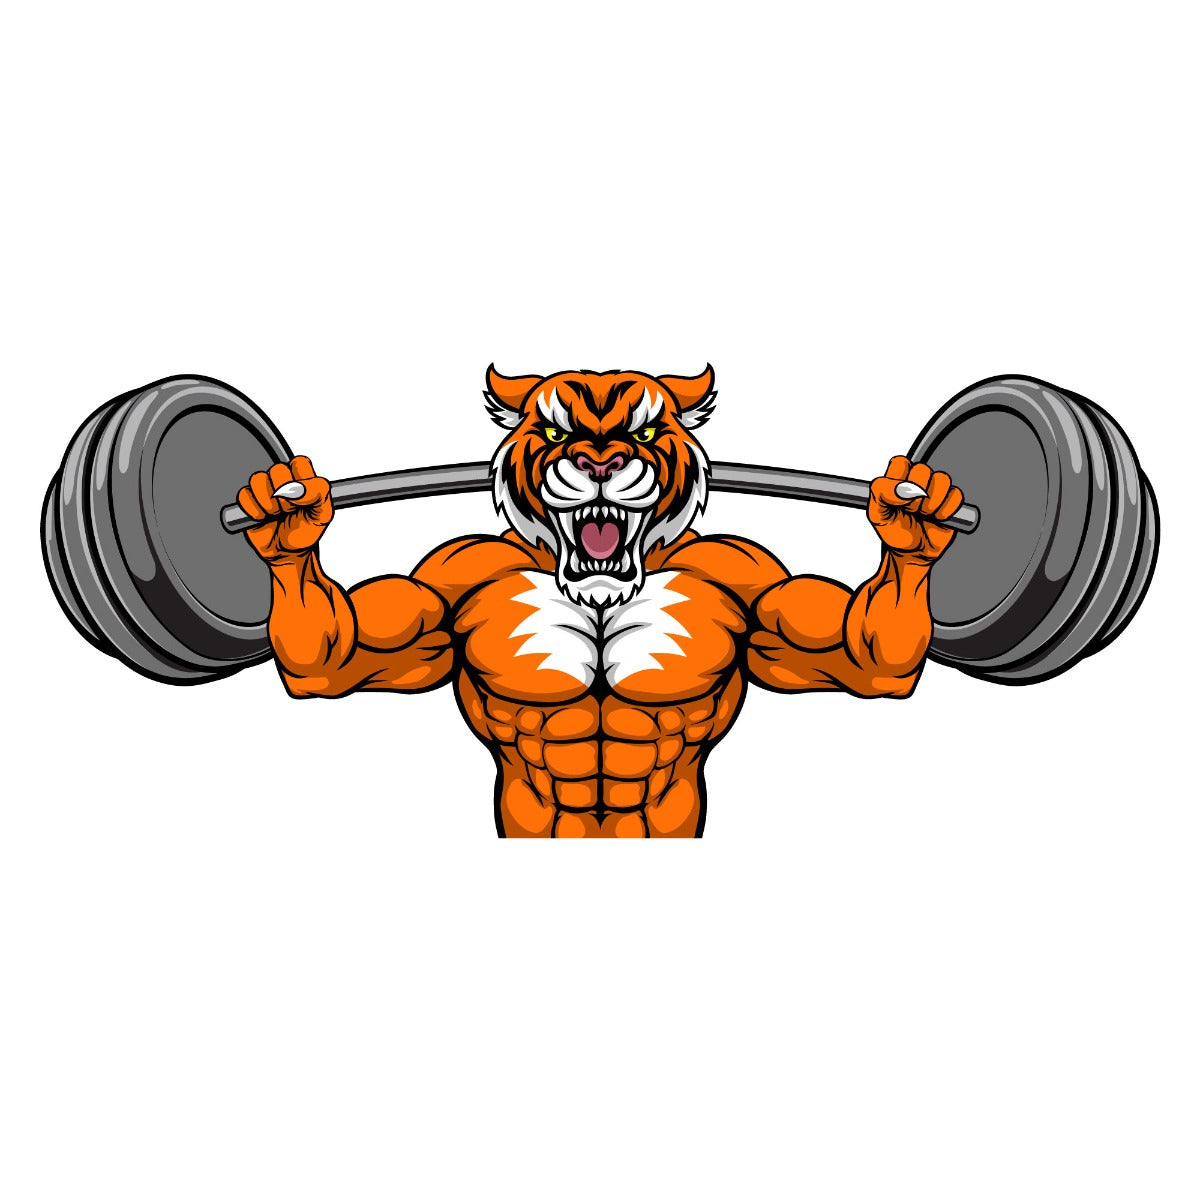 Gym Wall Sticker - Ripped Animal Barbell